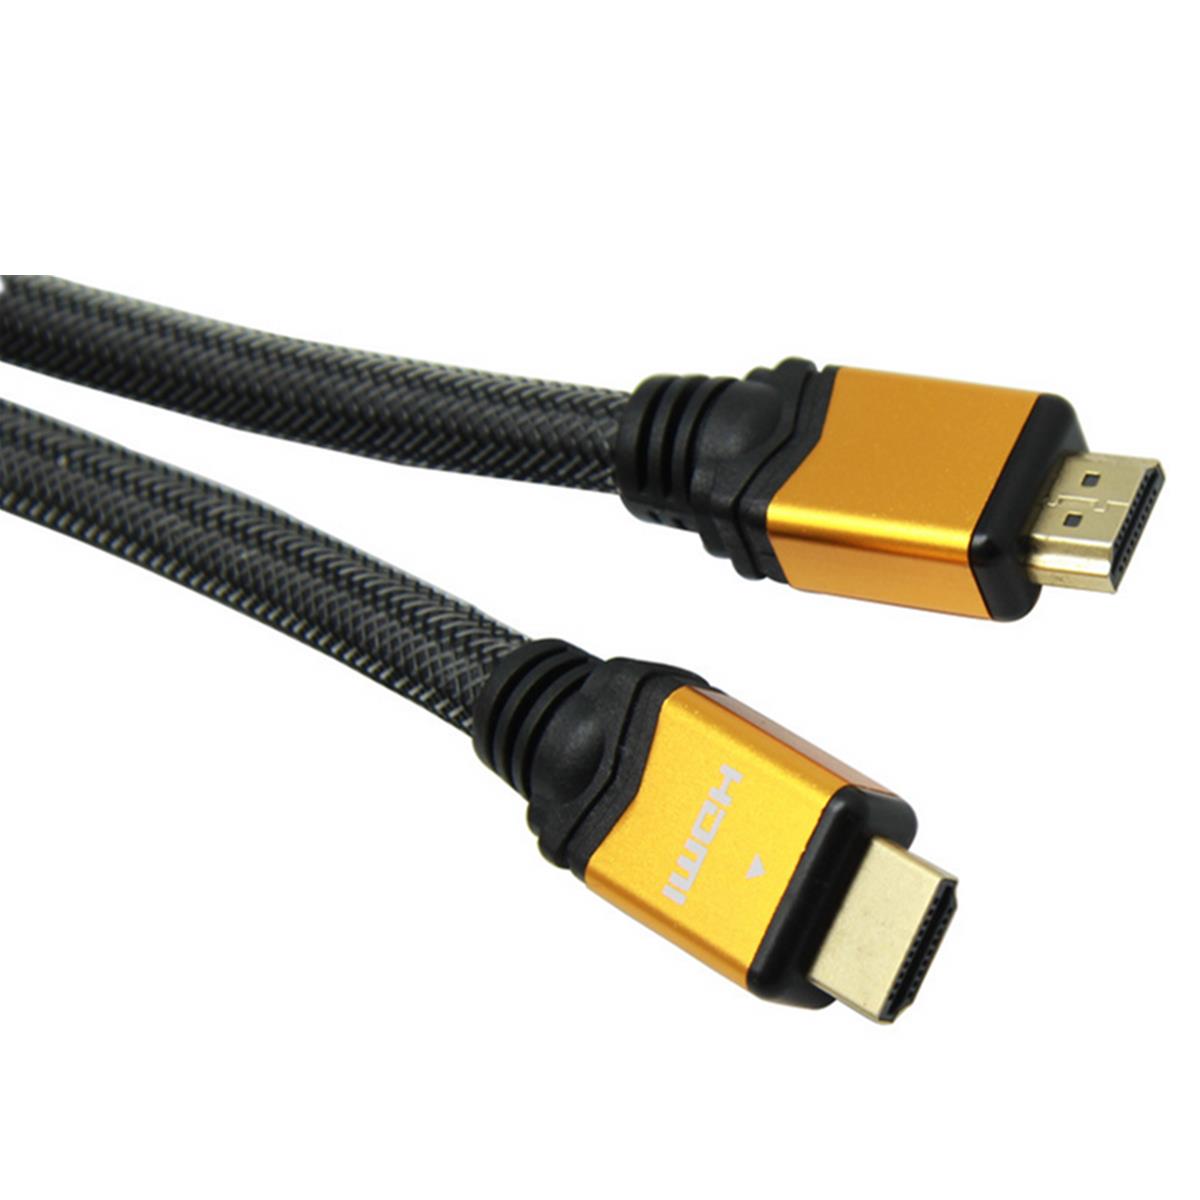 15M-3D-Orange-HD-Cable-Lead-V20-Gold-High-Speed-for-HDTV-Ultra-Hd-HD-2160p-4K-1131620